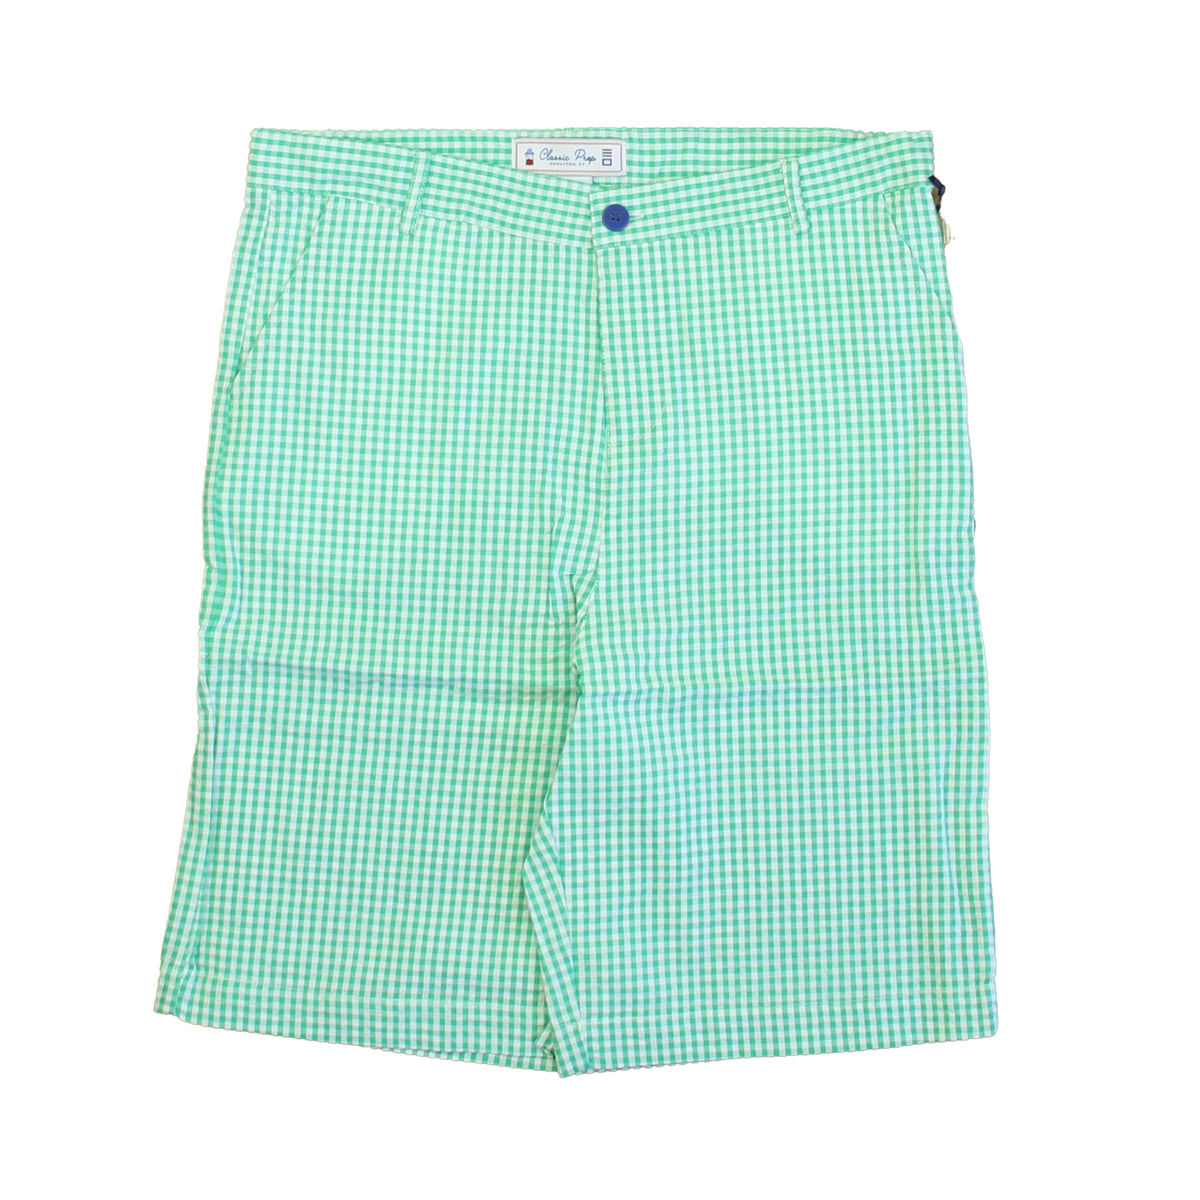 New with Tags: Blarney | Bright White Shorts size: 6-14 Years -- FINAL SALE